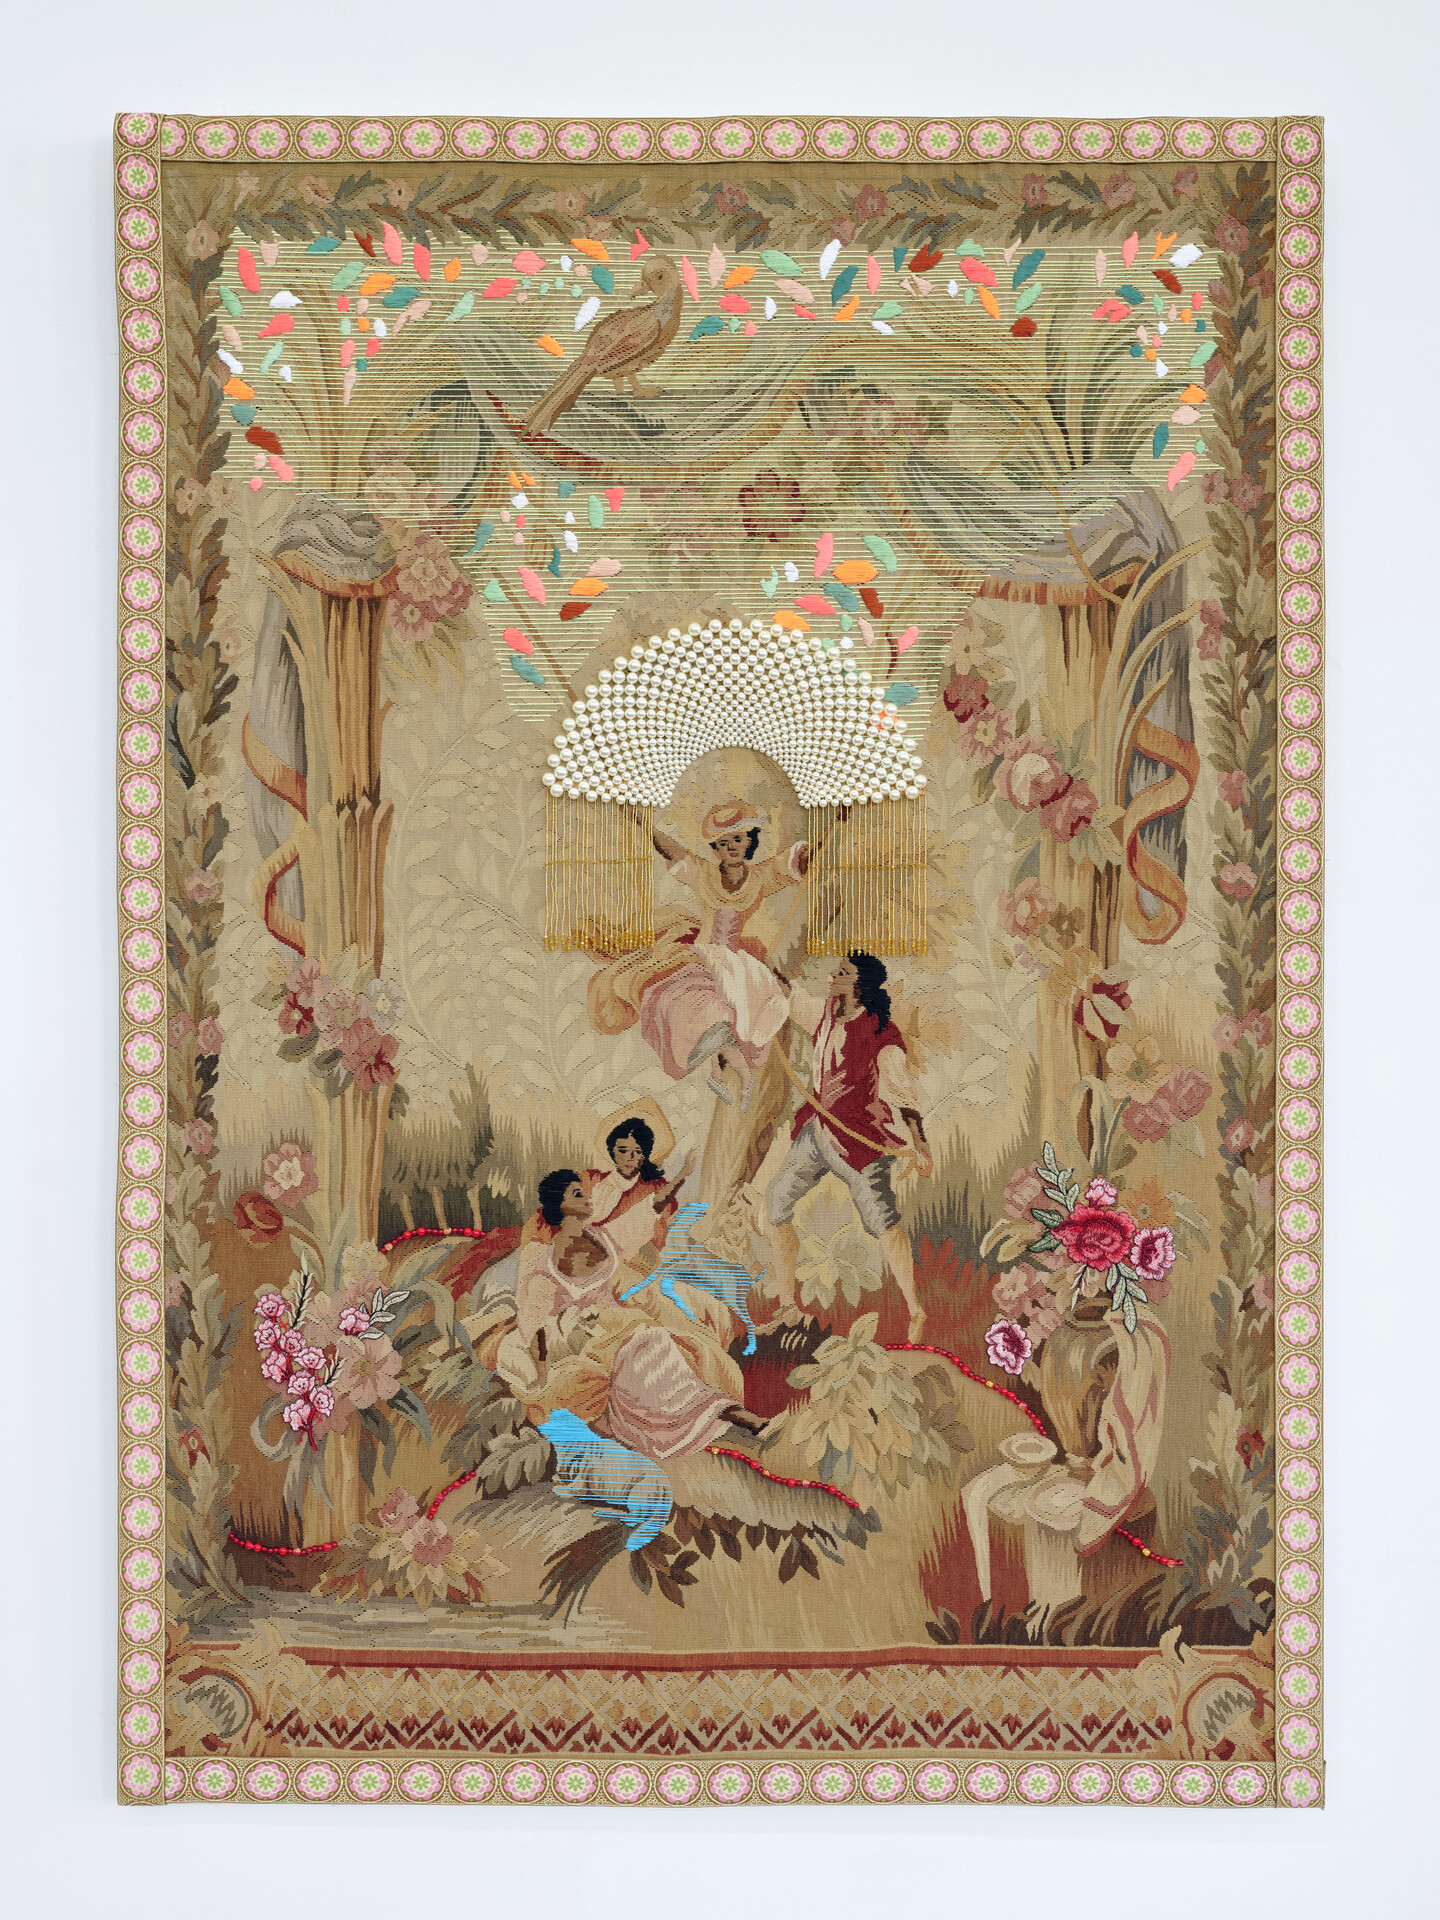 A vintage tapestry depicting three women and one man in a pastoral scene. One woman sits atop a swing while the others sit beneath her. The man holds the rope of the swing. Bright thread and beads are sewn over the original tapestry, and all four figures skin and hair have been darkened with brown and black thread.